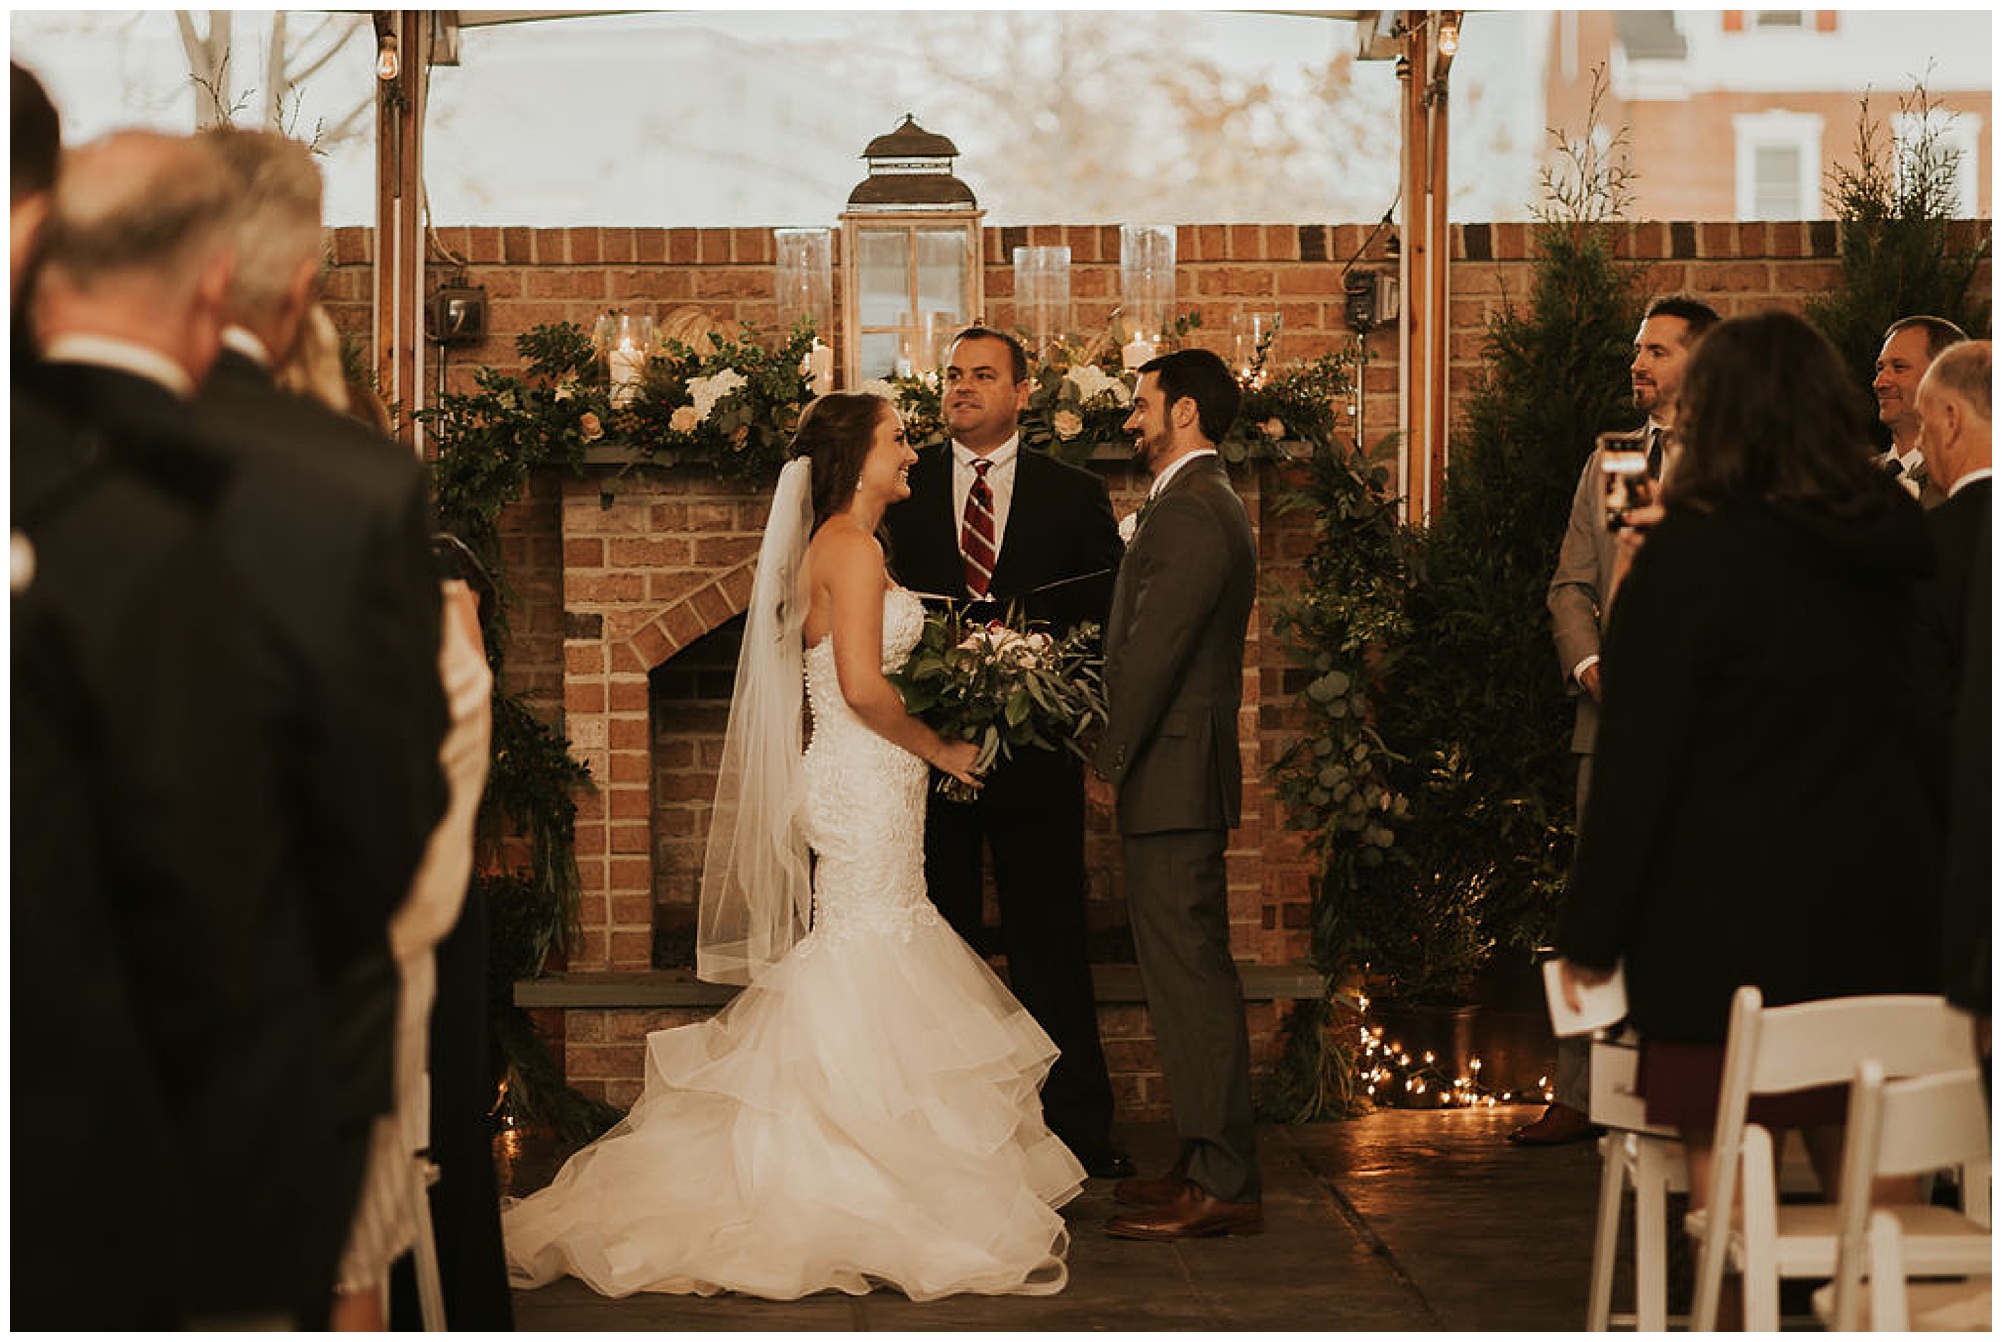 romantic, classy wedding inspiration and ideas at the tidewater inn venue in easton maryland in the autumn fall. outdoor ceremony in tent yurt style setting with fireplace. moody sultry and totally gorgeous. now featured on my eastern shore wedding blog.